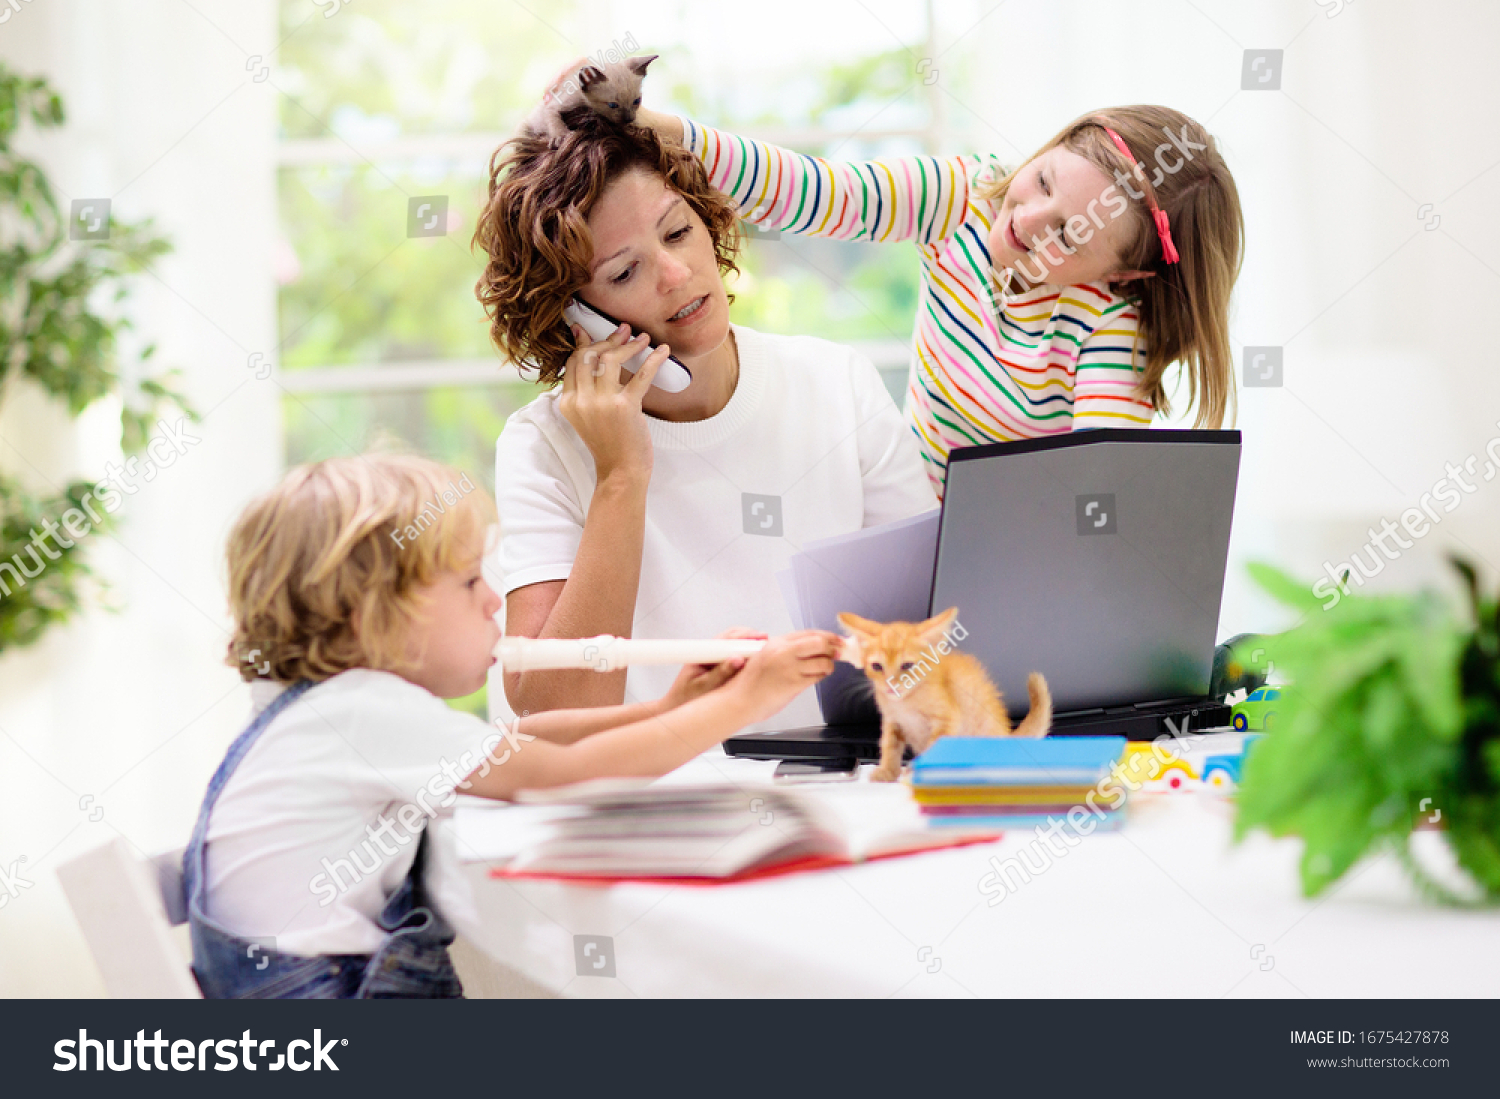 Mother working from home with kids. Quarantine and closed school during coronavirus outbreak. Children make noise and disturb woman at work. Homeschooling and freelance job. Boy and girl playing. #1675427878